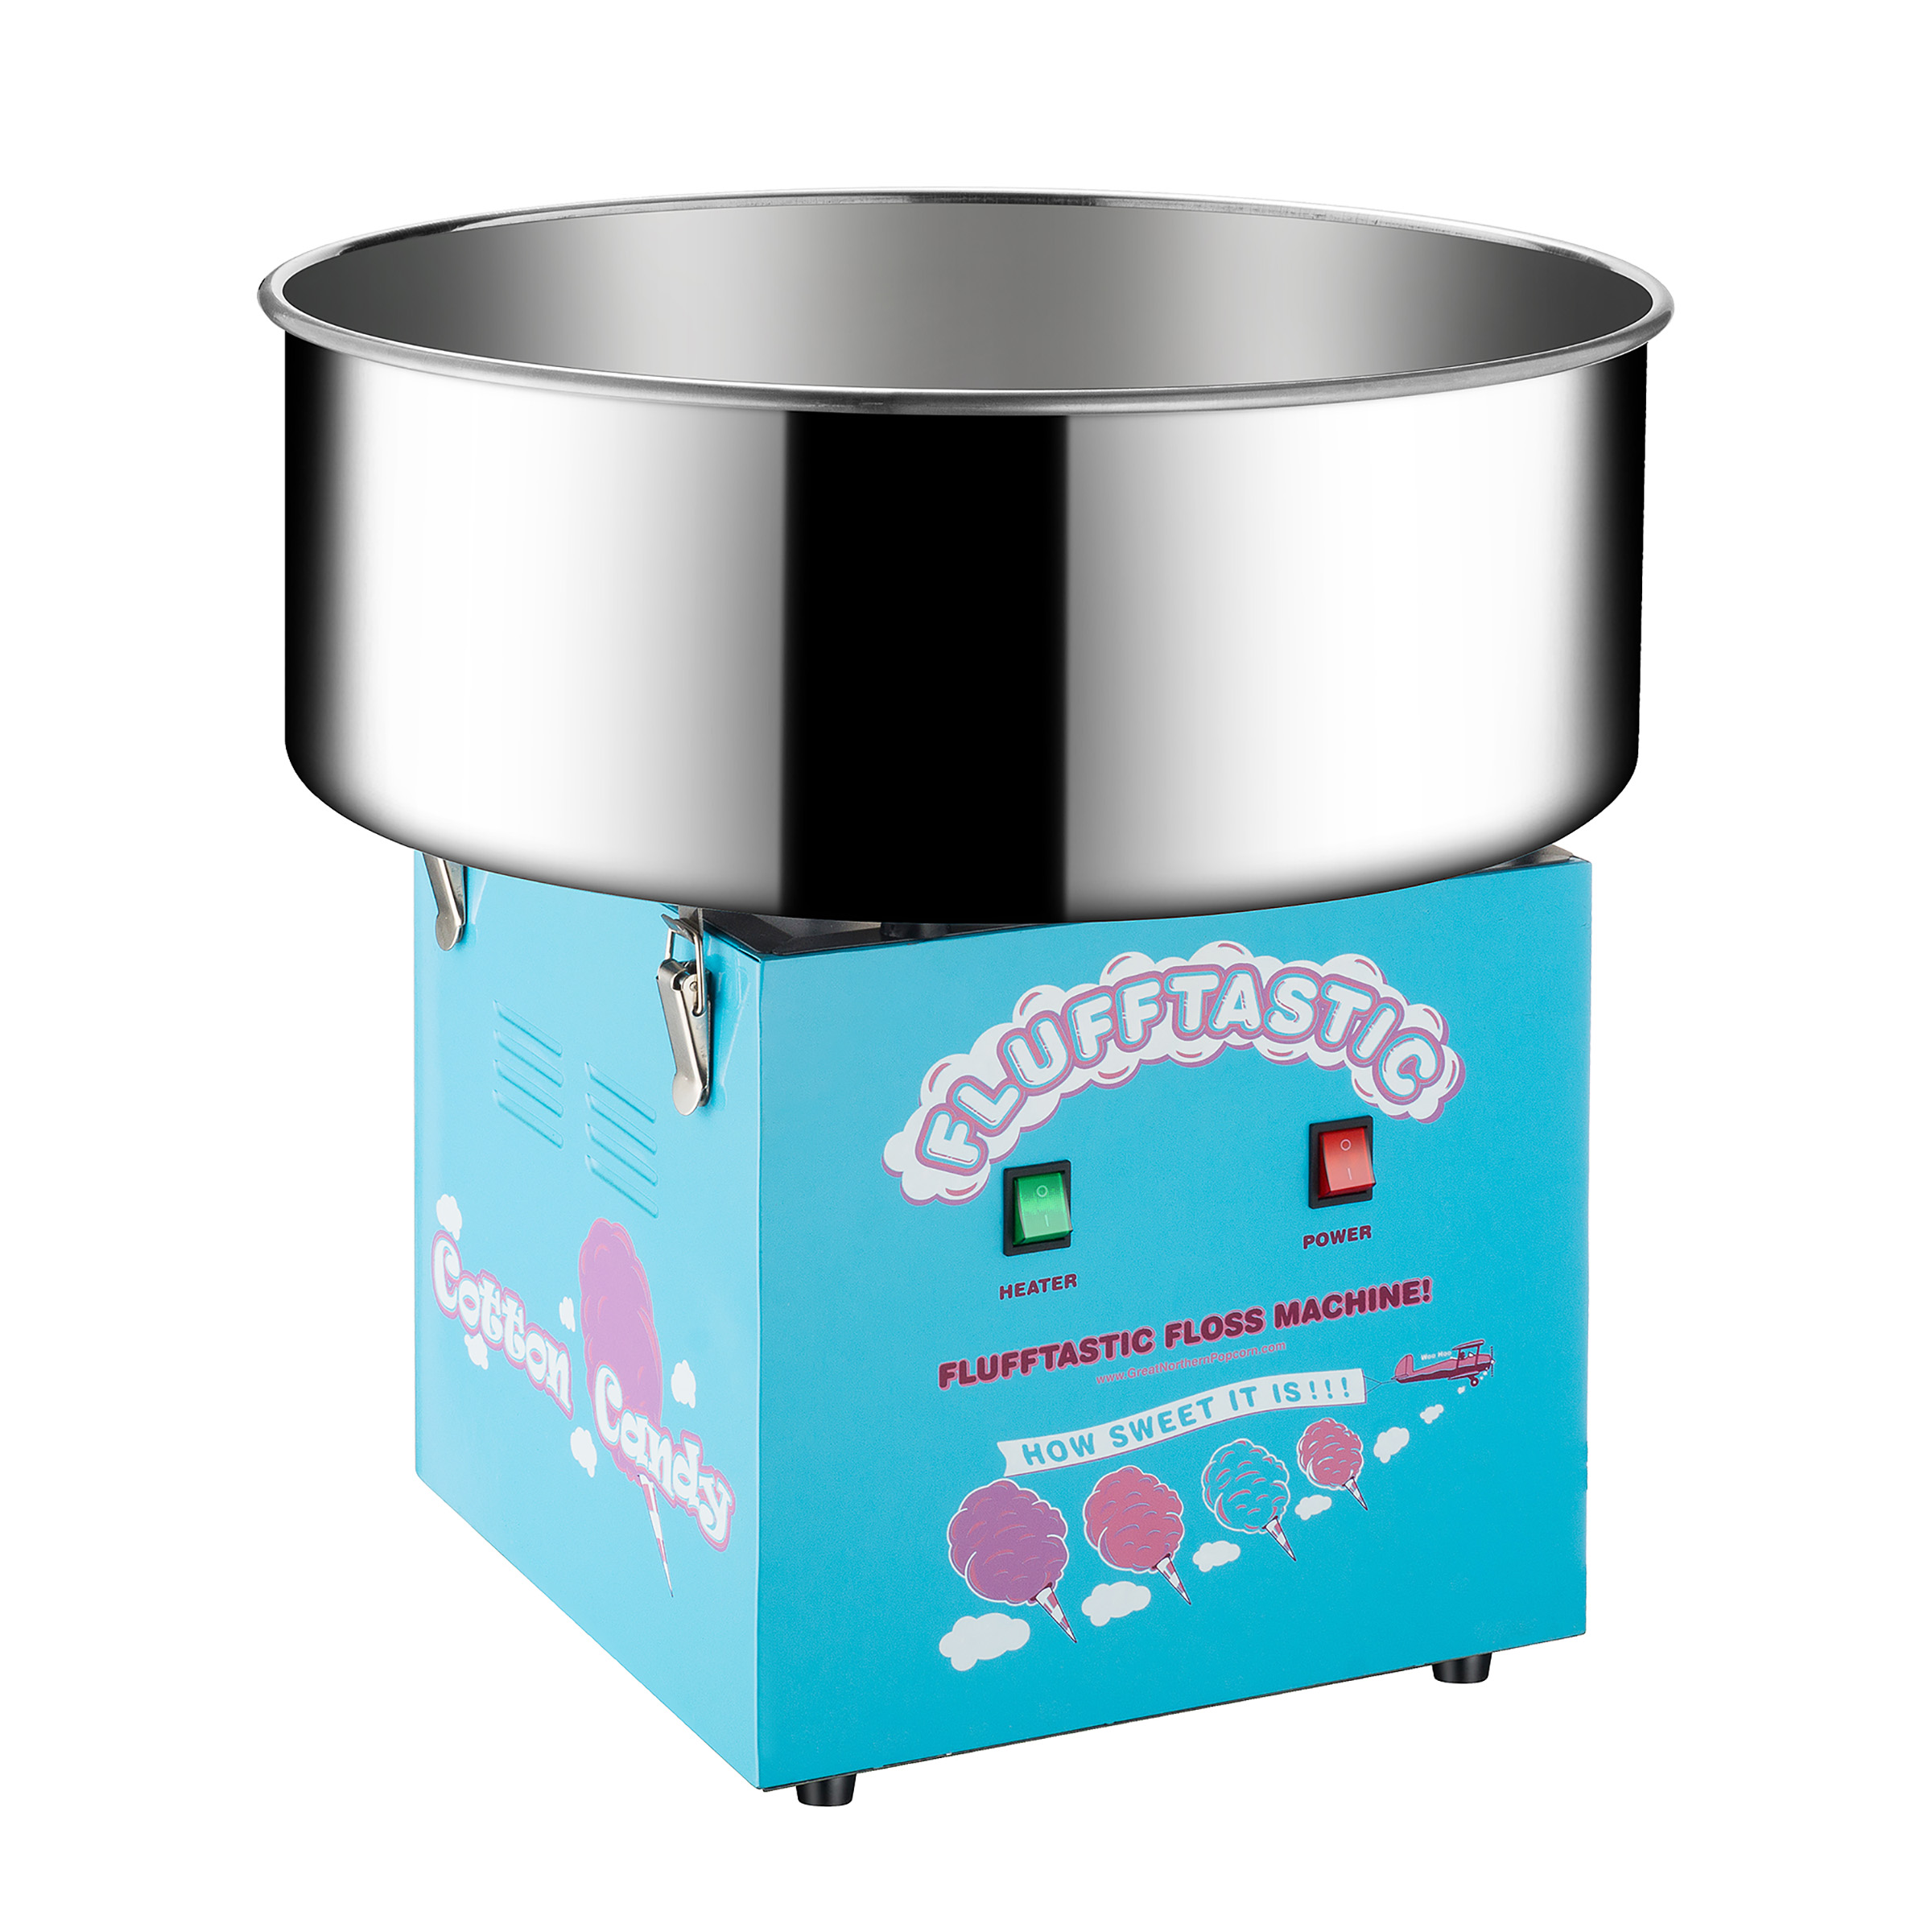 Great Northern Cotton Candy Machine "Flufftastic" Floss Maker Electric, Blue - image 1 of 8